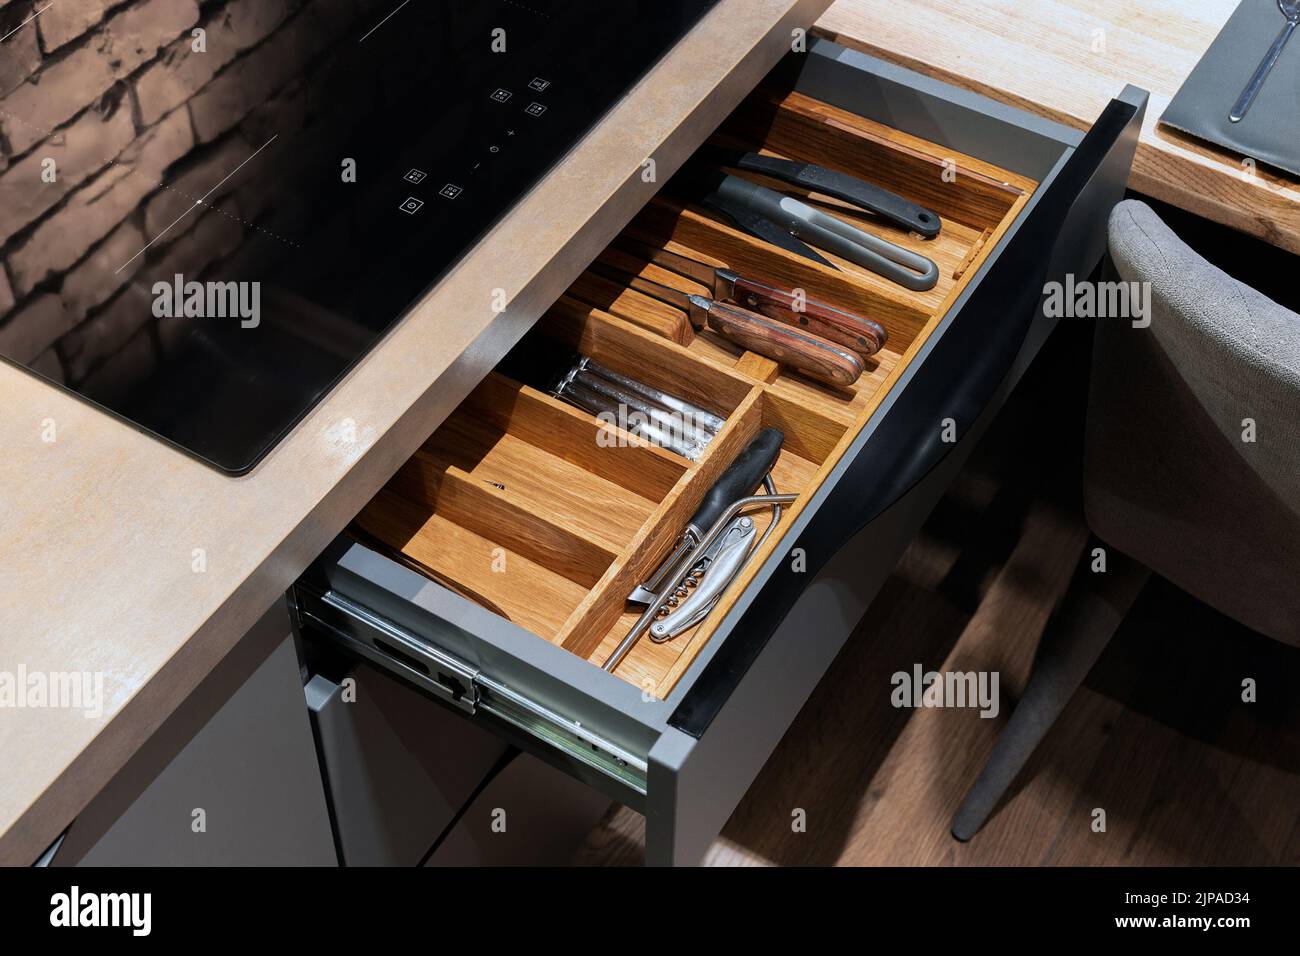 Modern kitchen. Set of cutlery trays in kitchen drawer. Solid oak wood cutlery drawer inserts. Stock Photo